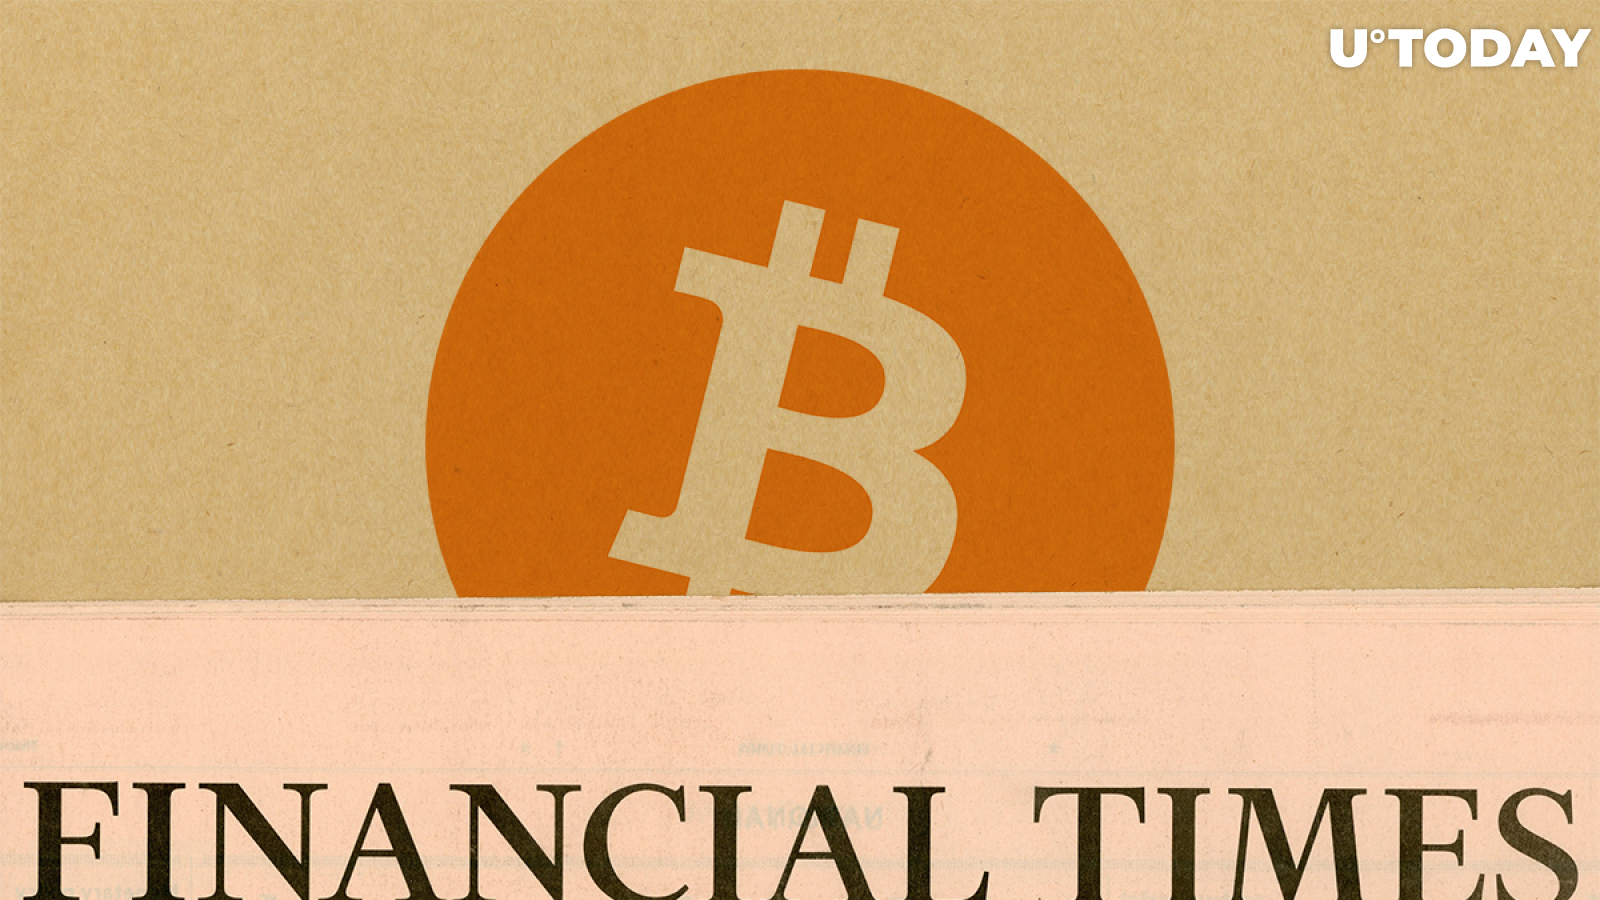 Bitcoin's Rally to $30,000 Featured on Front Page of Financial Times